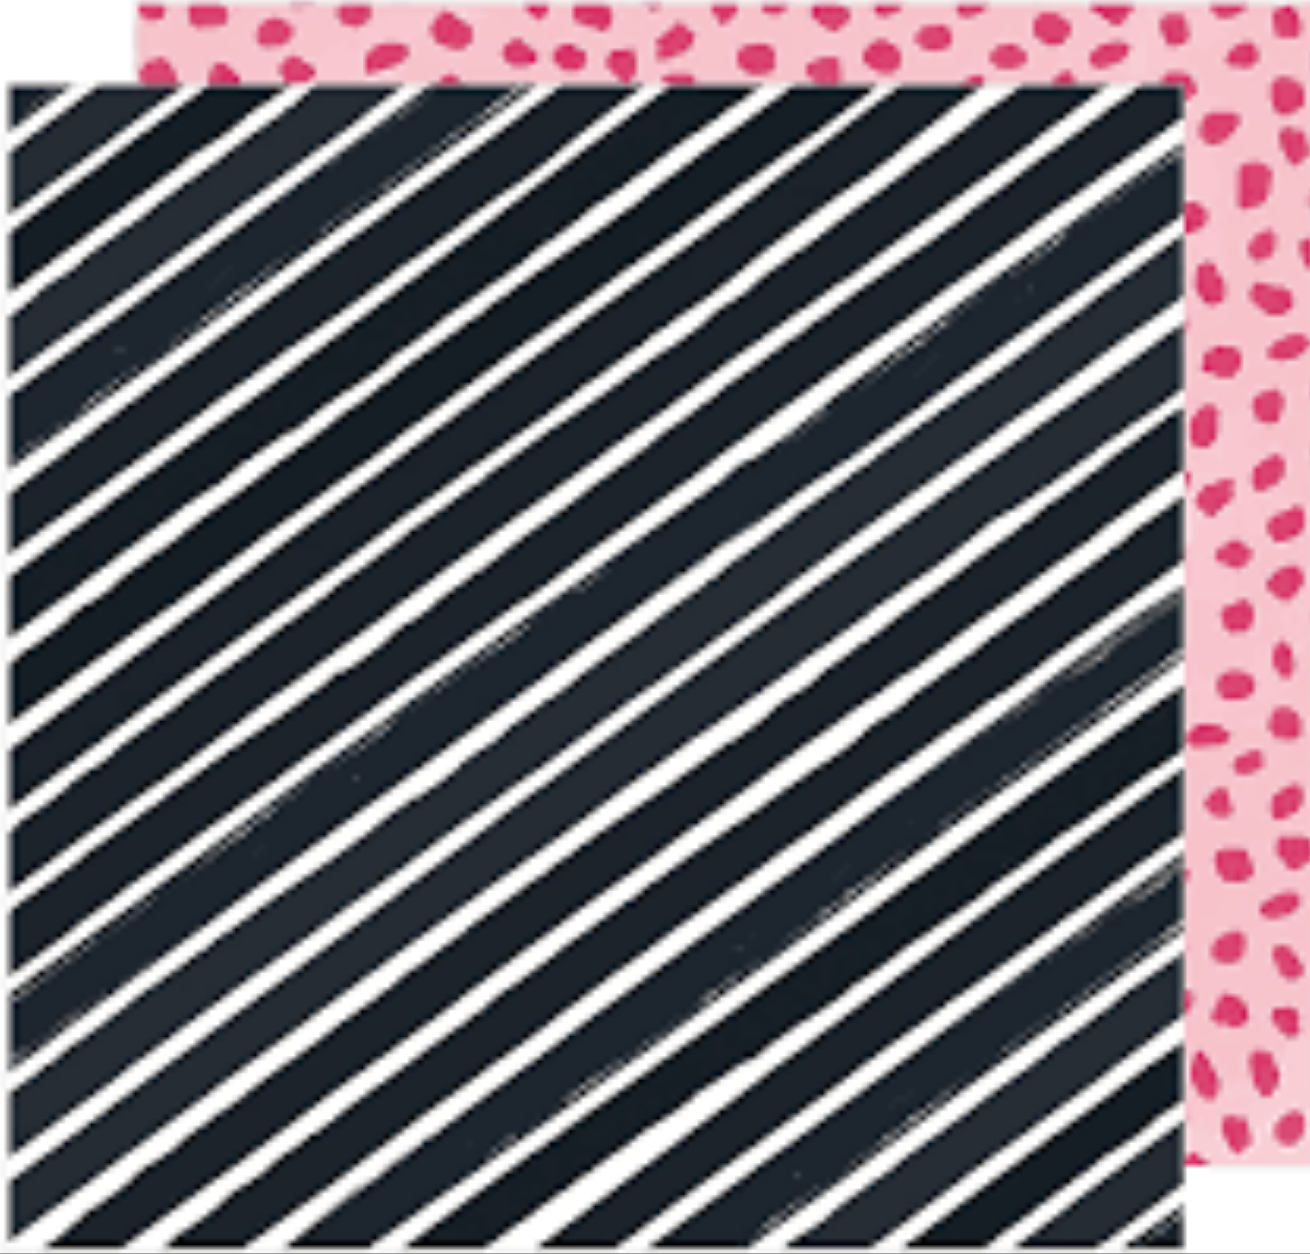 Multi-Colored (thick brushed black diagonal lines on a white background - fuchsia pink brush strokes on a bubblegum pink background reverse) Double-sided sheet. From Hustle & Heart Collection by Amy Tangerine. Smooth surface. Printed on two sides